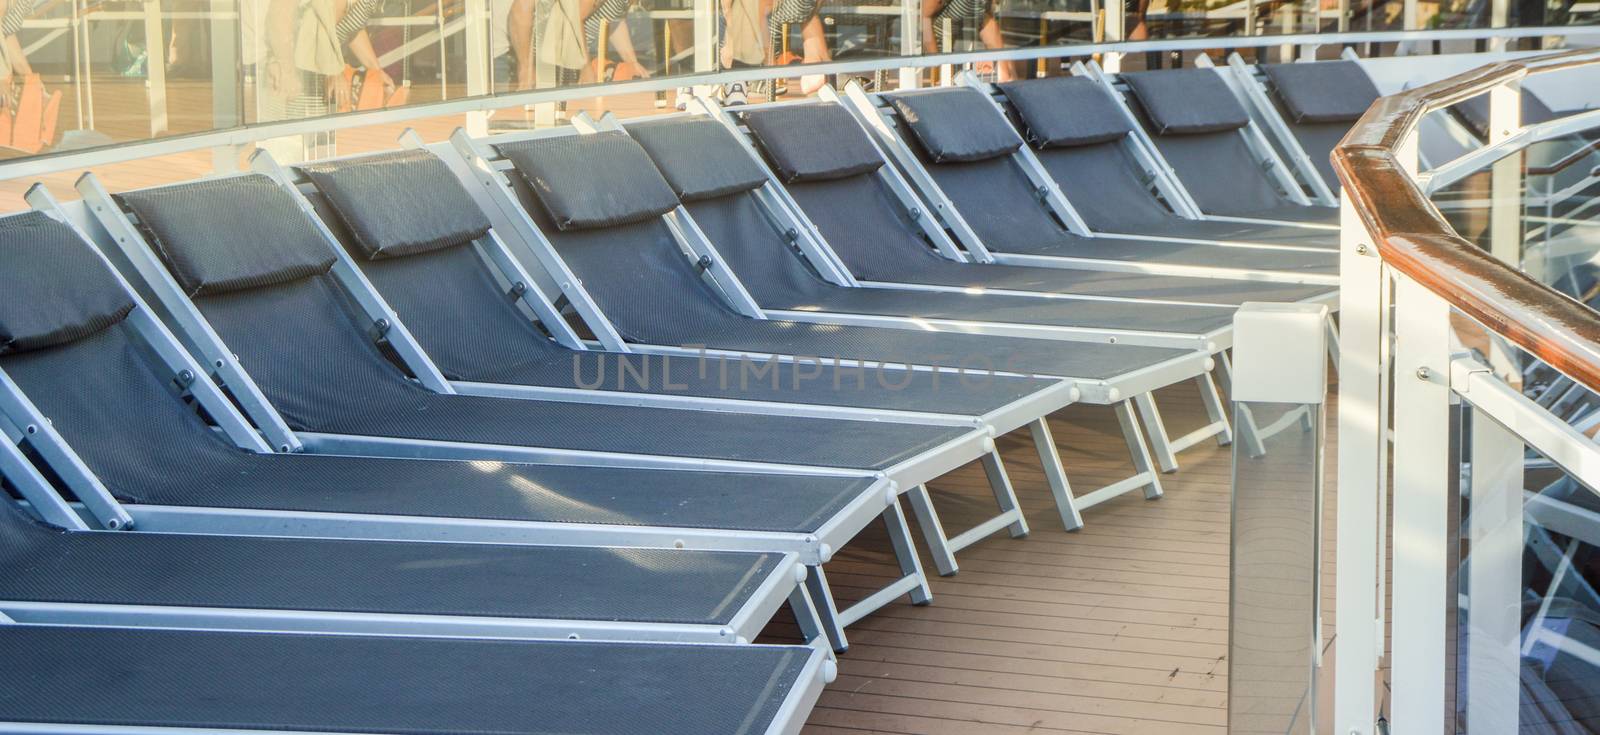 Empty deck chairs on the upper deck of a cruise ship, NOBODY, OUTDOOR, SEA RECREATION CONCEPT by claire_lucia